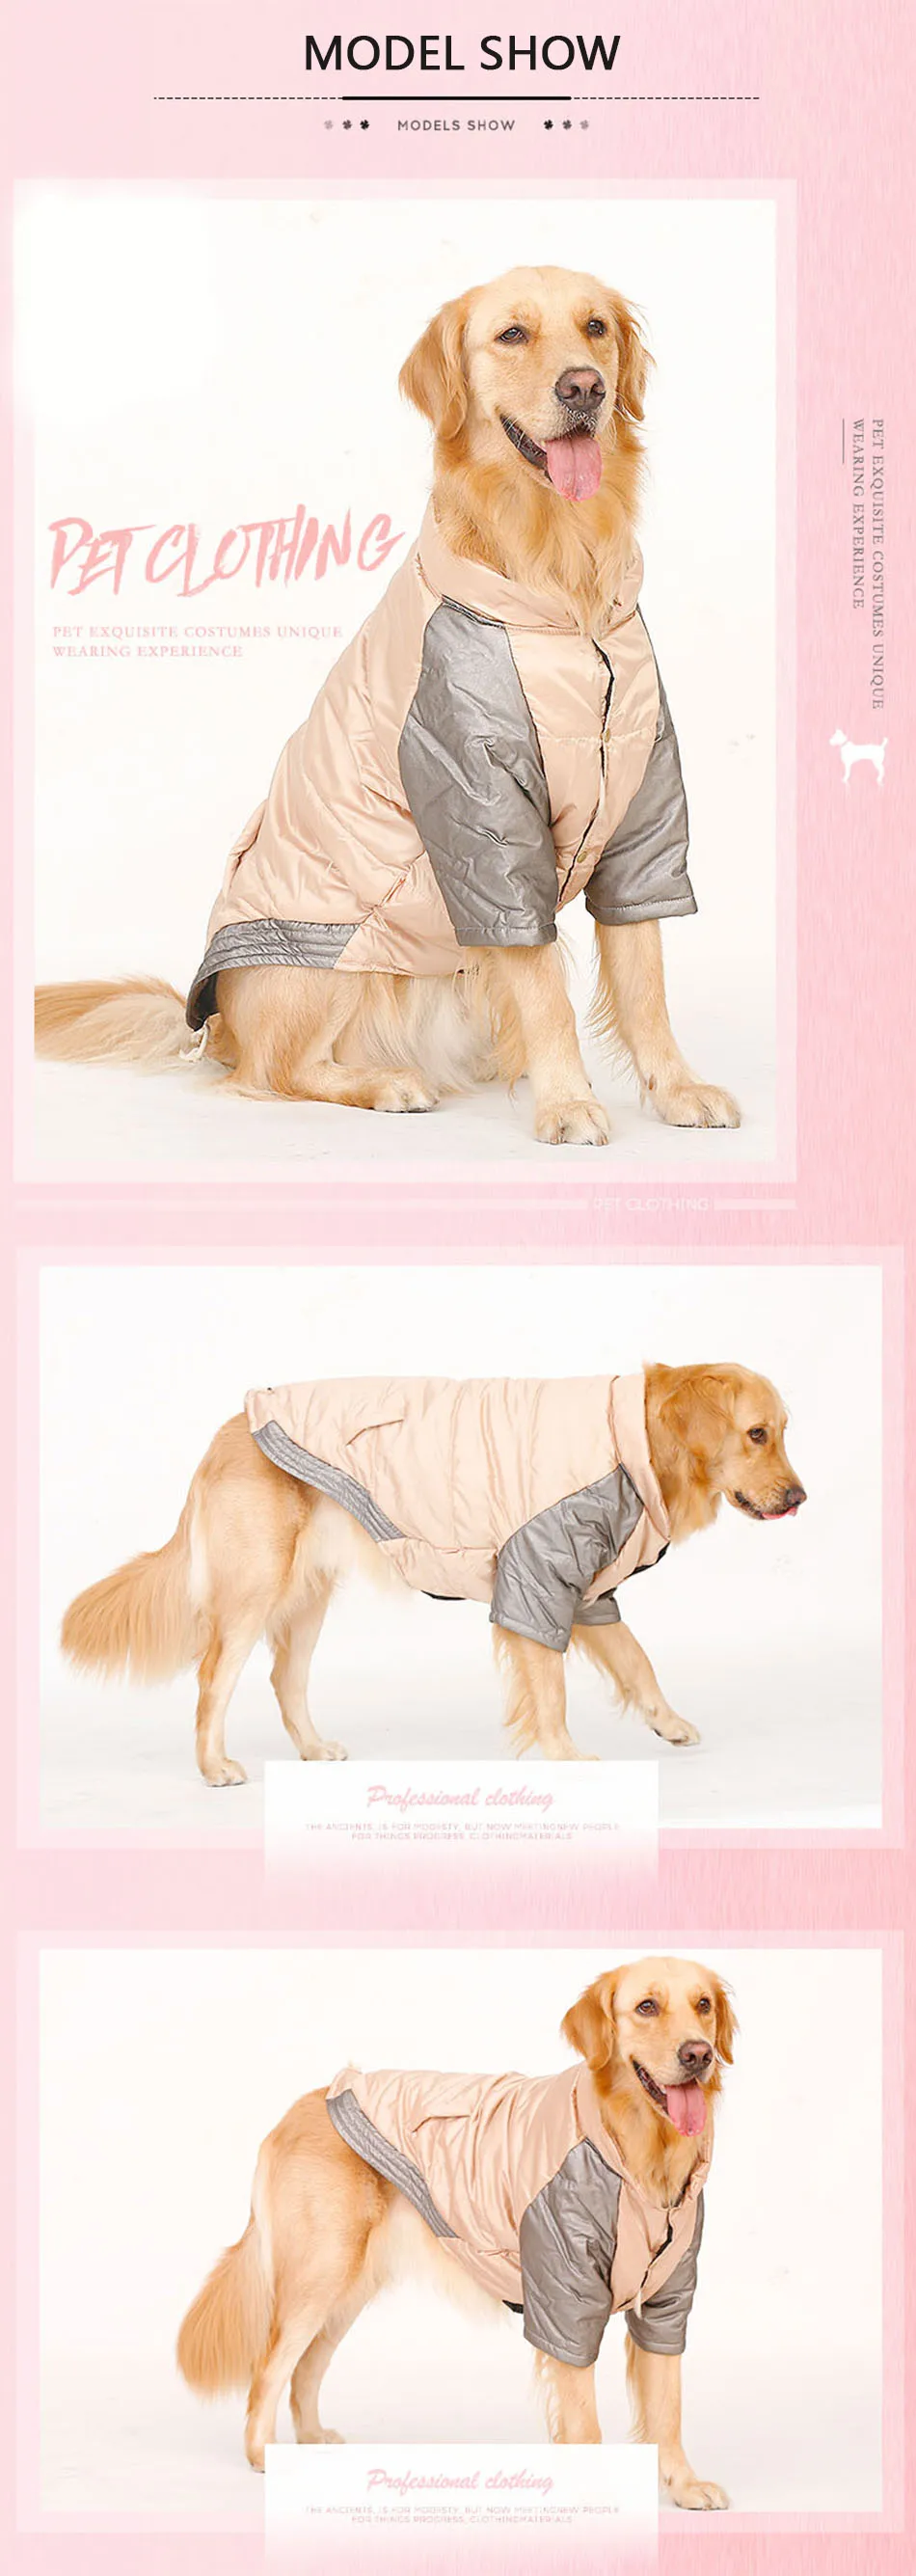 Hoopet Big Dog Clothes Winter Parkas Warm Stitching Color Champagne Gold Dog Winter Jumpsuit Husky Samoyed Clothes 3XL-7XL (2)